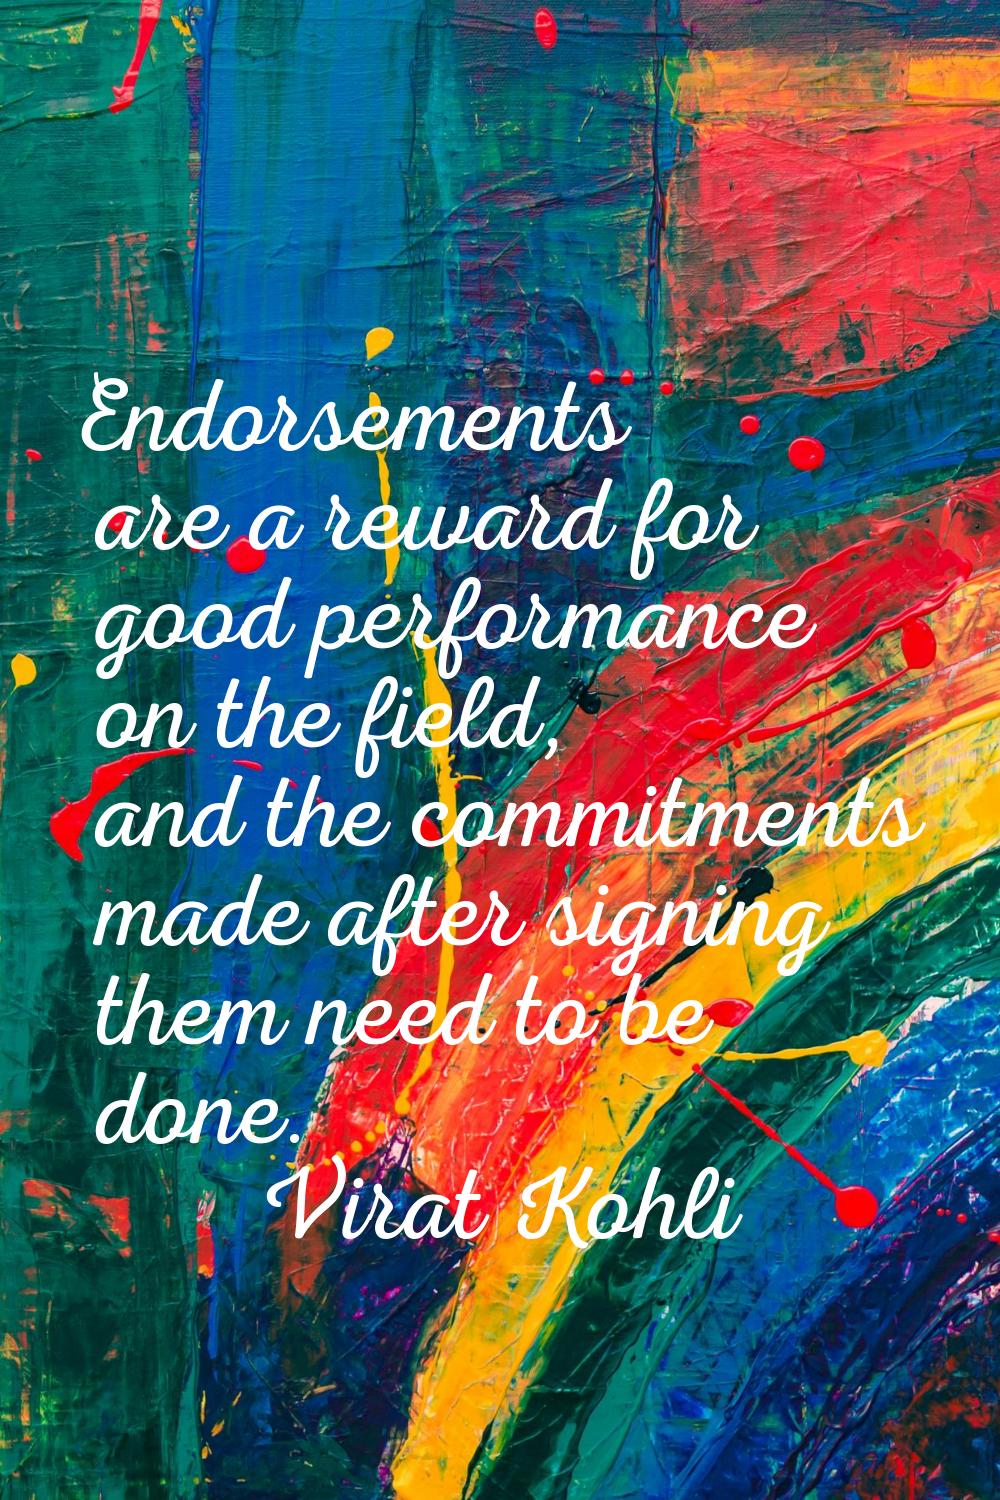 Endorsements are a reward for good performance on the field, and the commitments made after signing